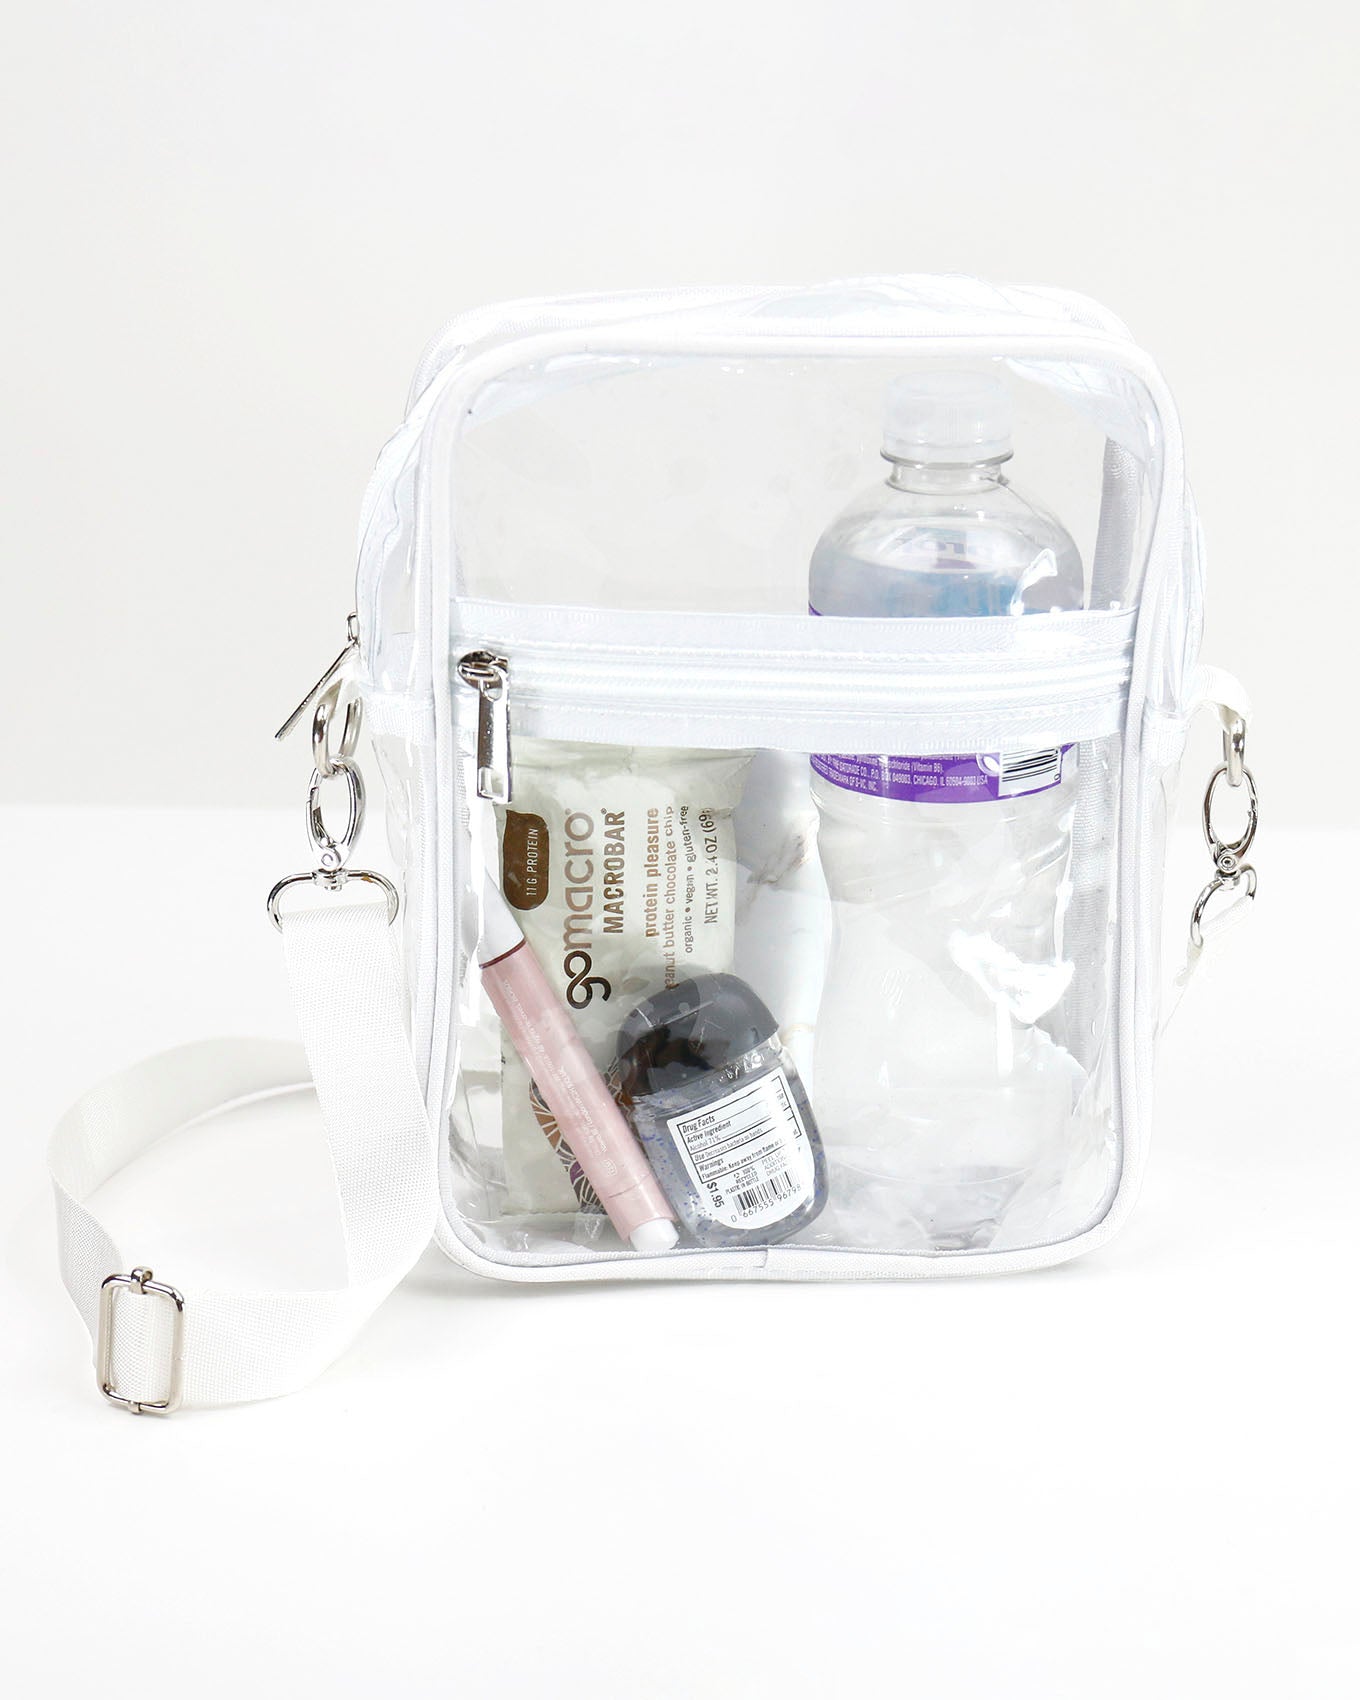 front view of clear stadium bag with white trim